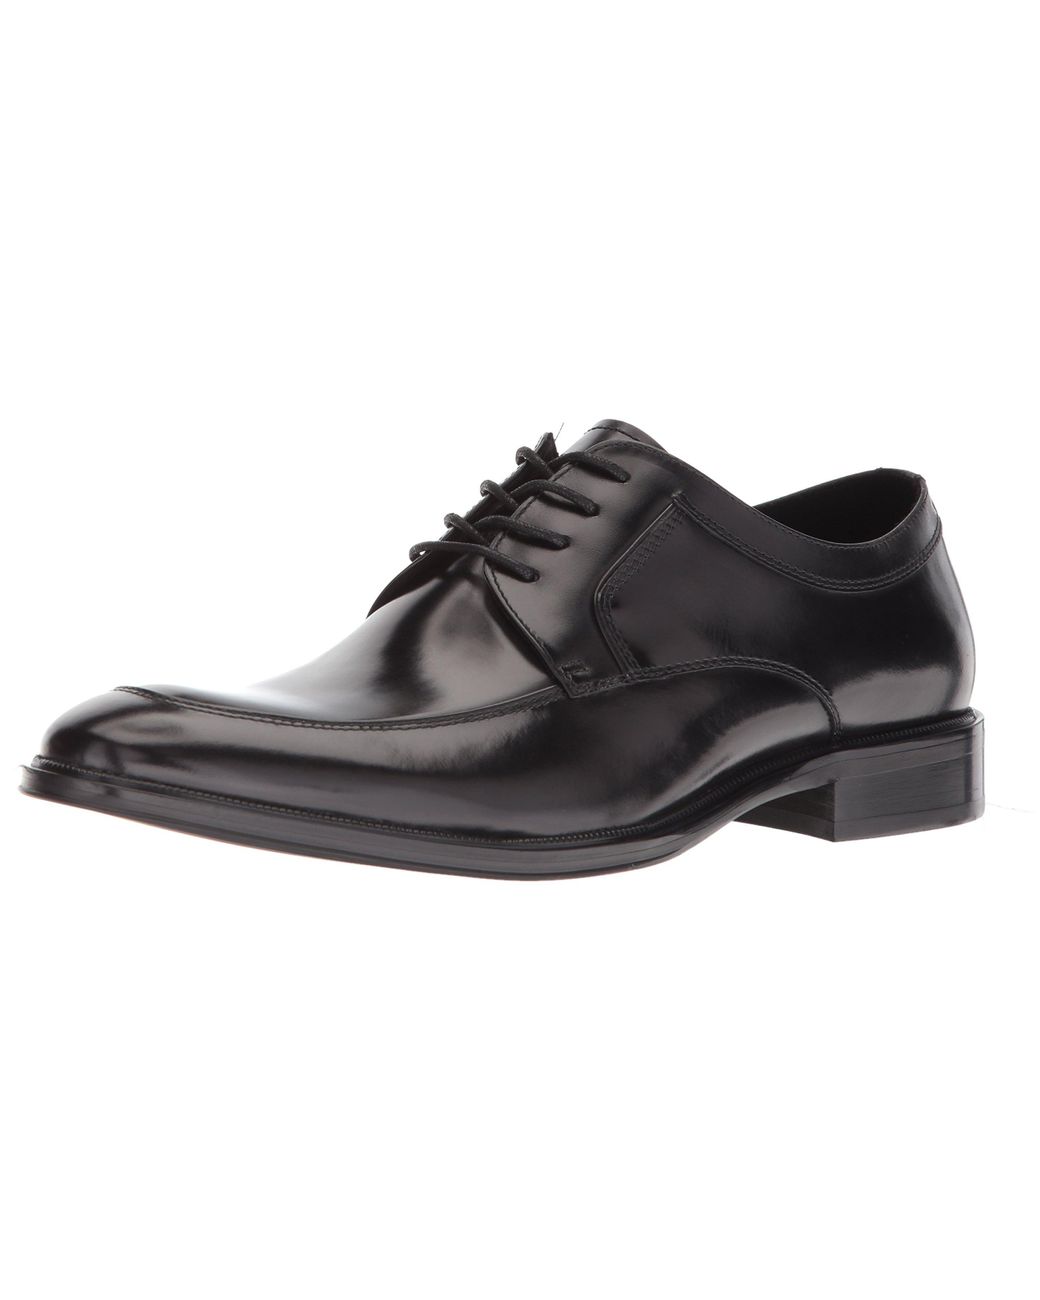 Kenneth Cole Leather Tully Oxford in Black for Men - Save 11% - Lyst